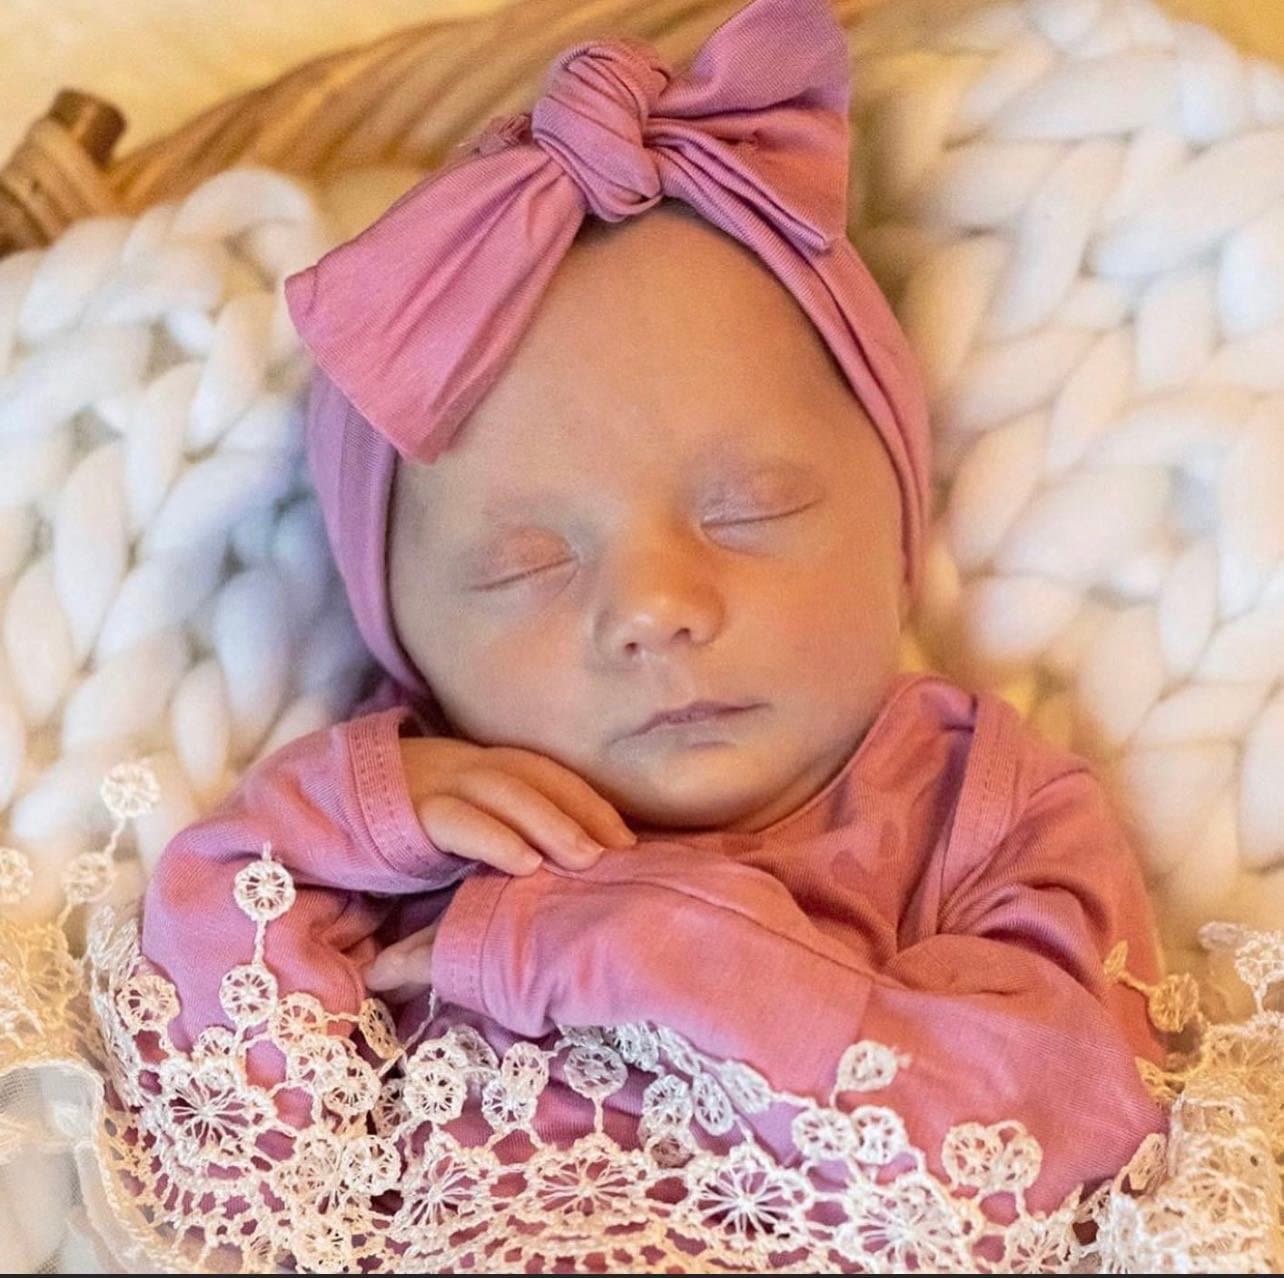 Rose Knotted Gown And Bow Baby in Styles